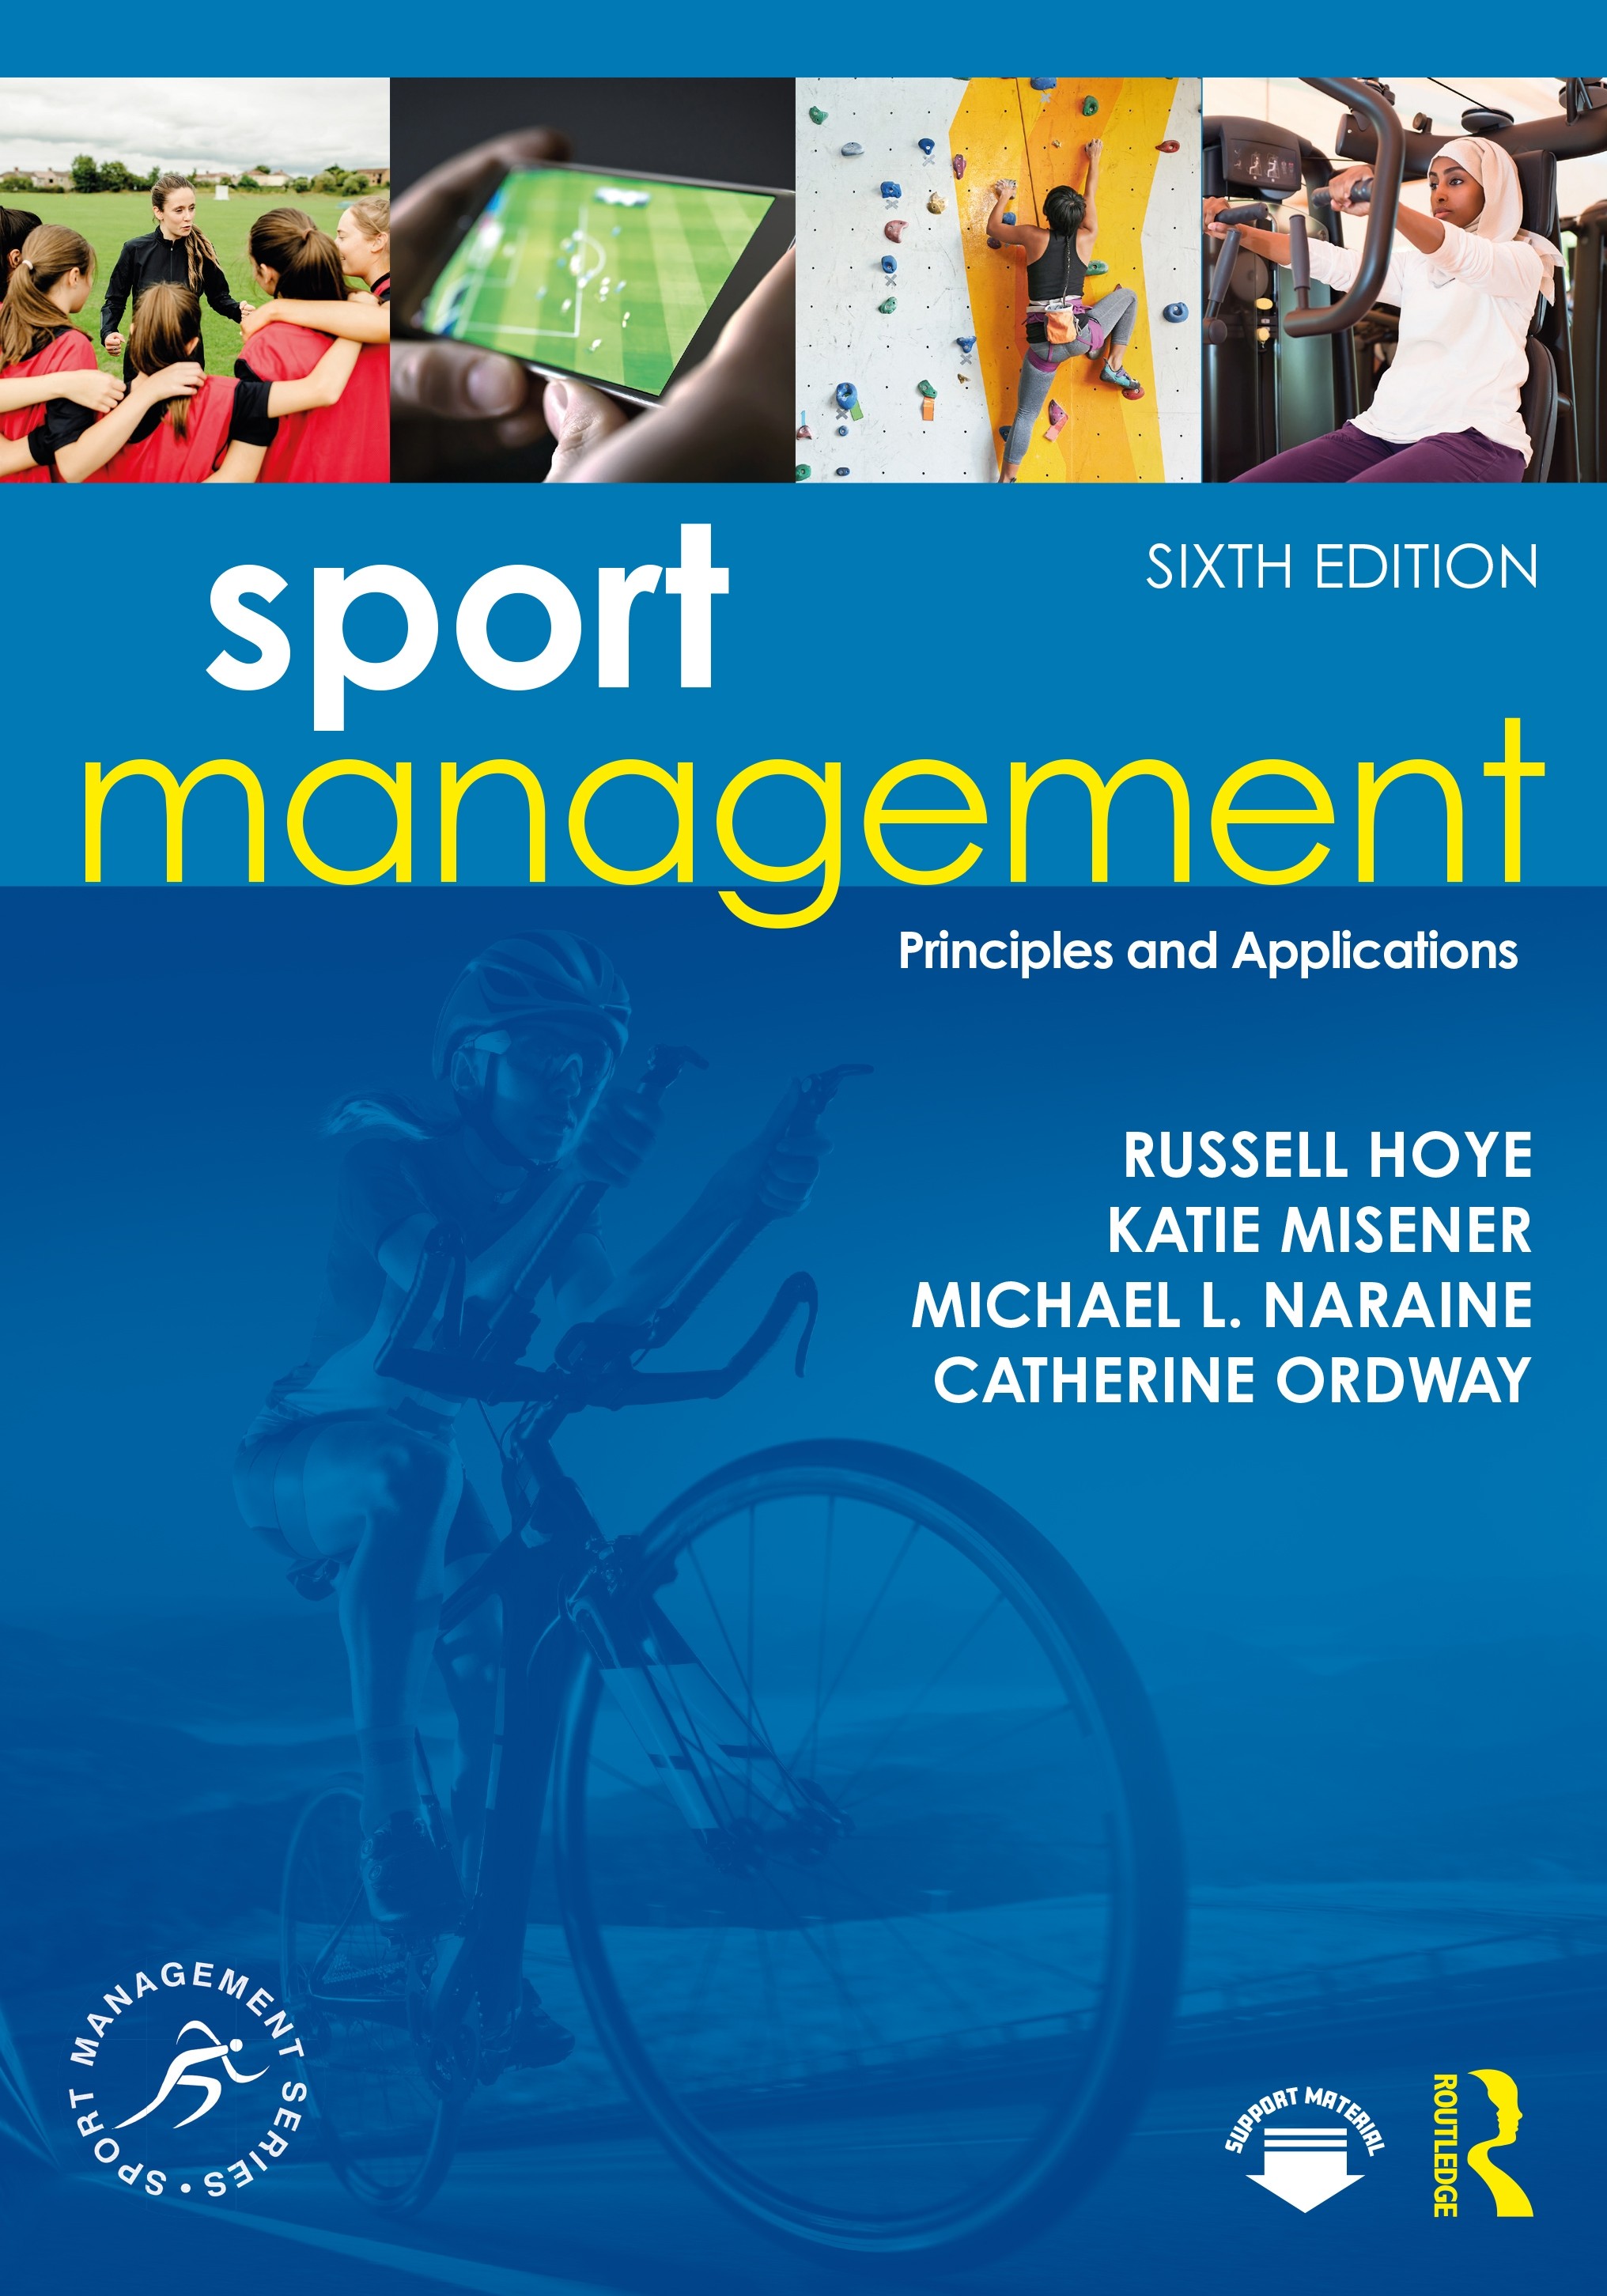 research paper on sports management